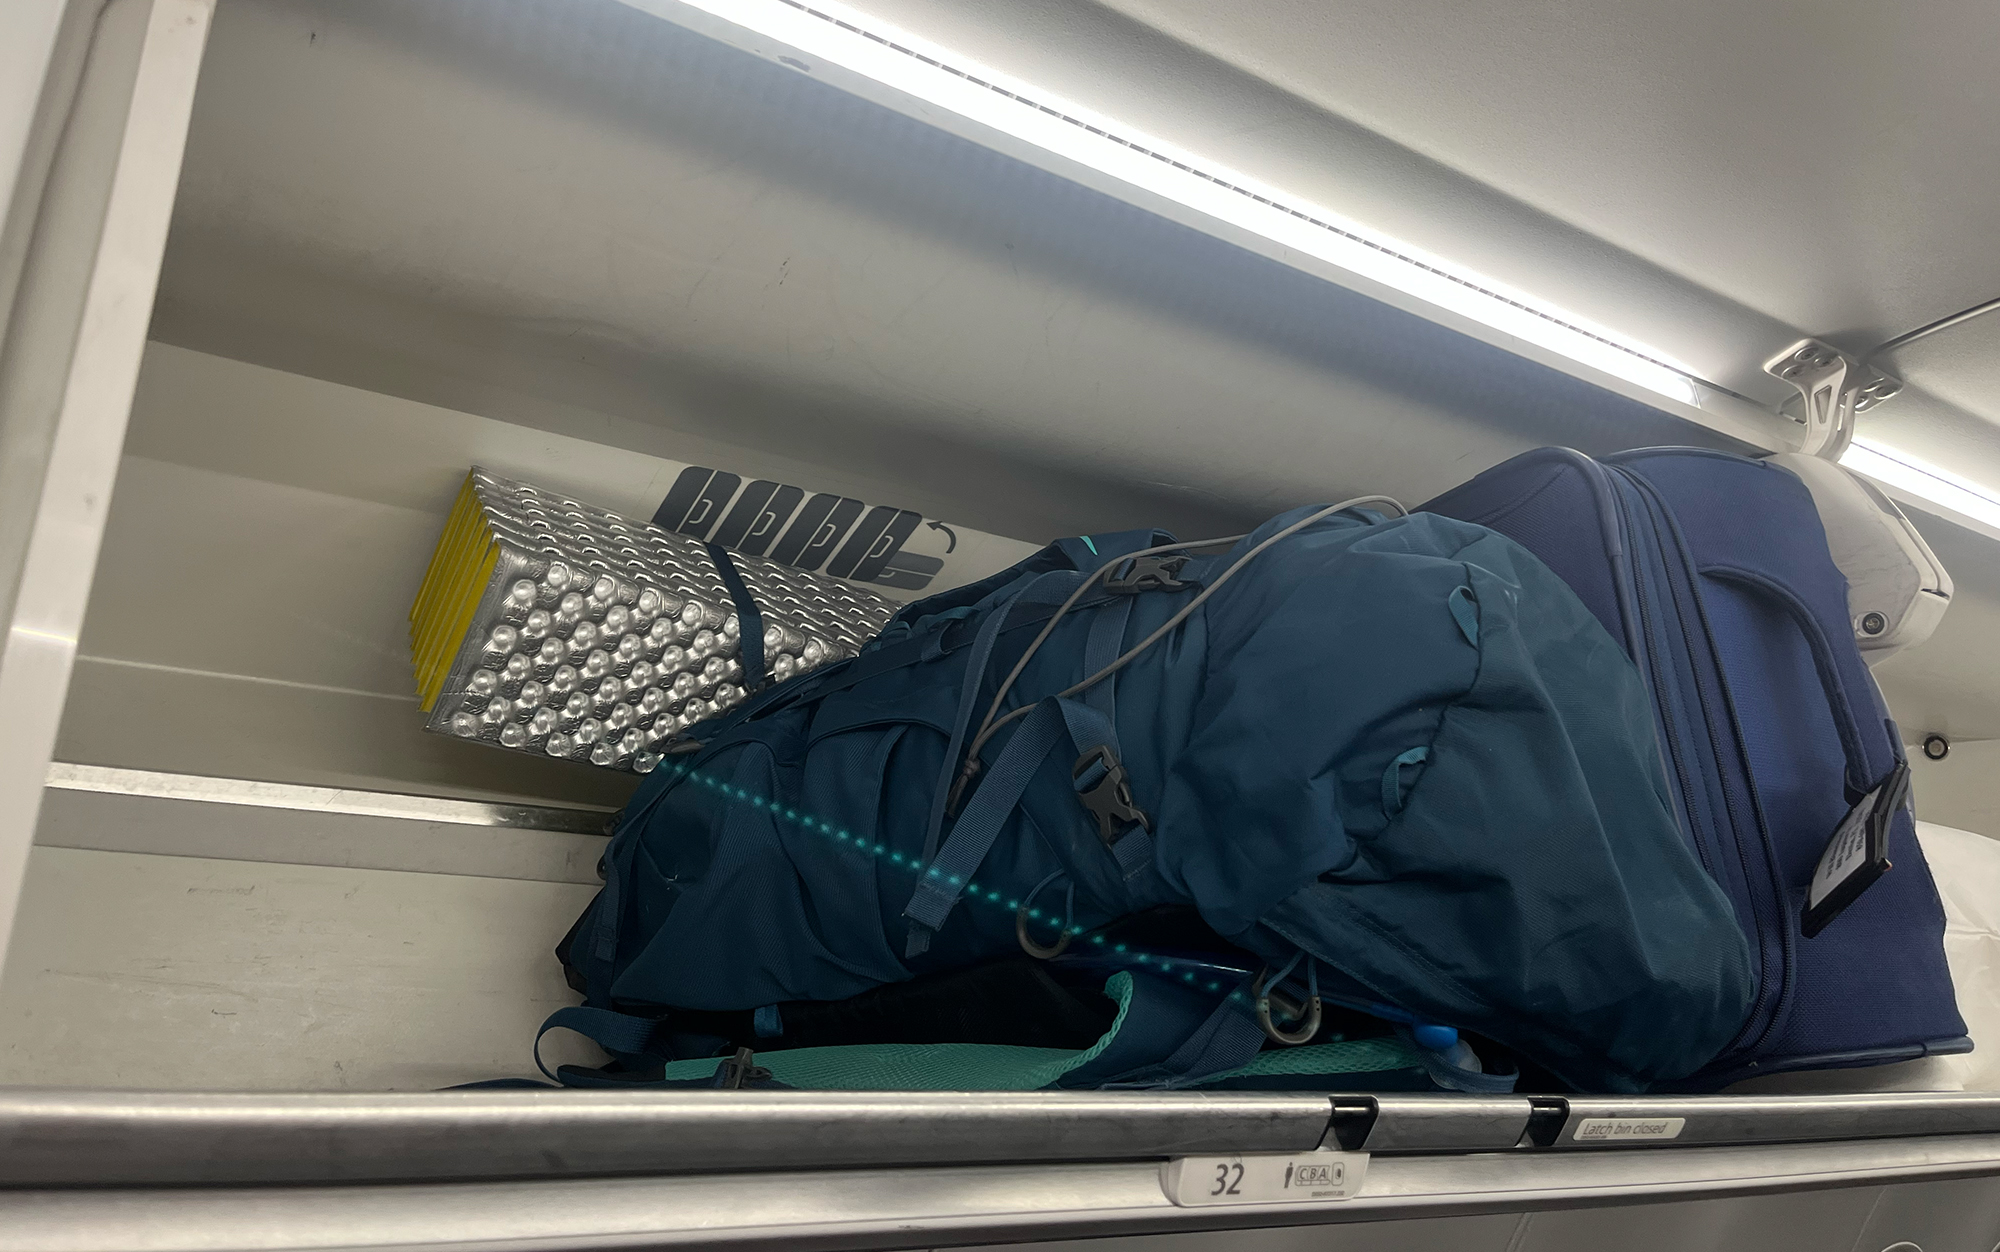 The Osprey Kyte fits in the overhead bin even with a sleeping pad attached to the bottom.